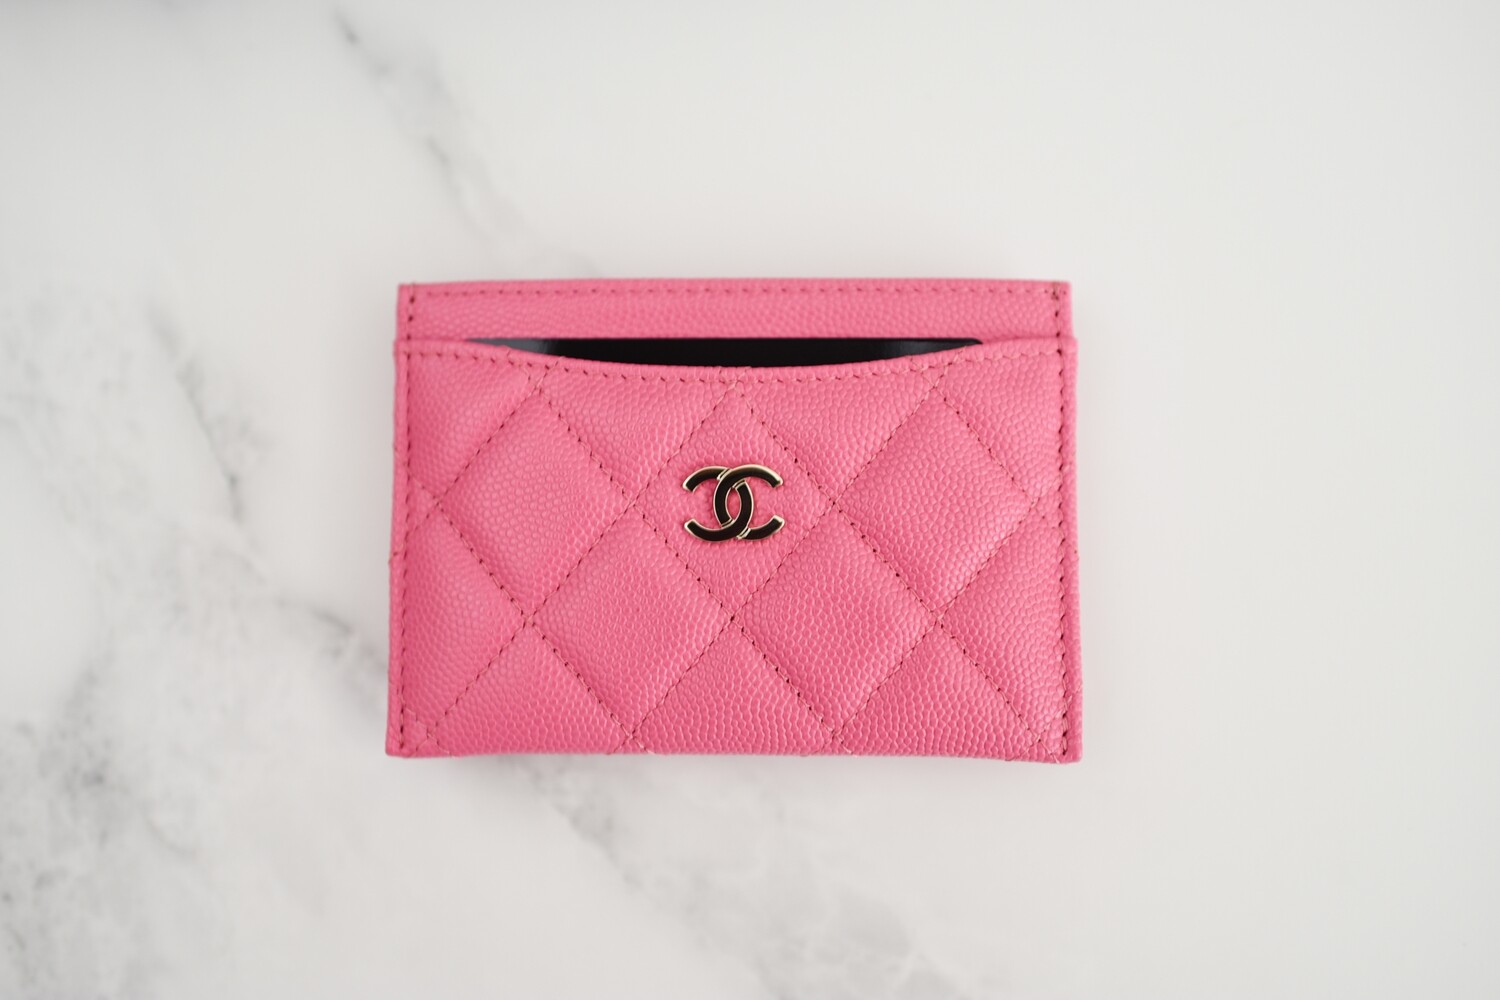 Chanel SLG Flat Cardholder, Bubblegum Pink Caviar Leather, Gold Hardware,  New in White Cambon Box